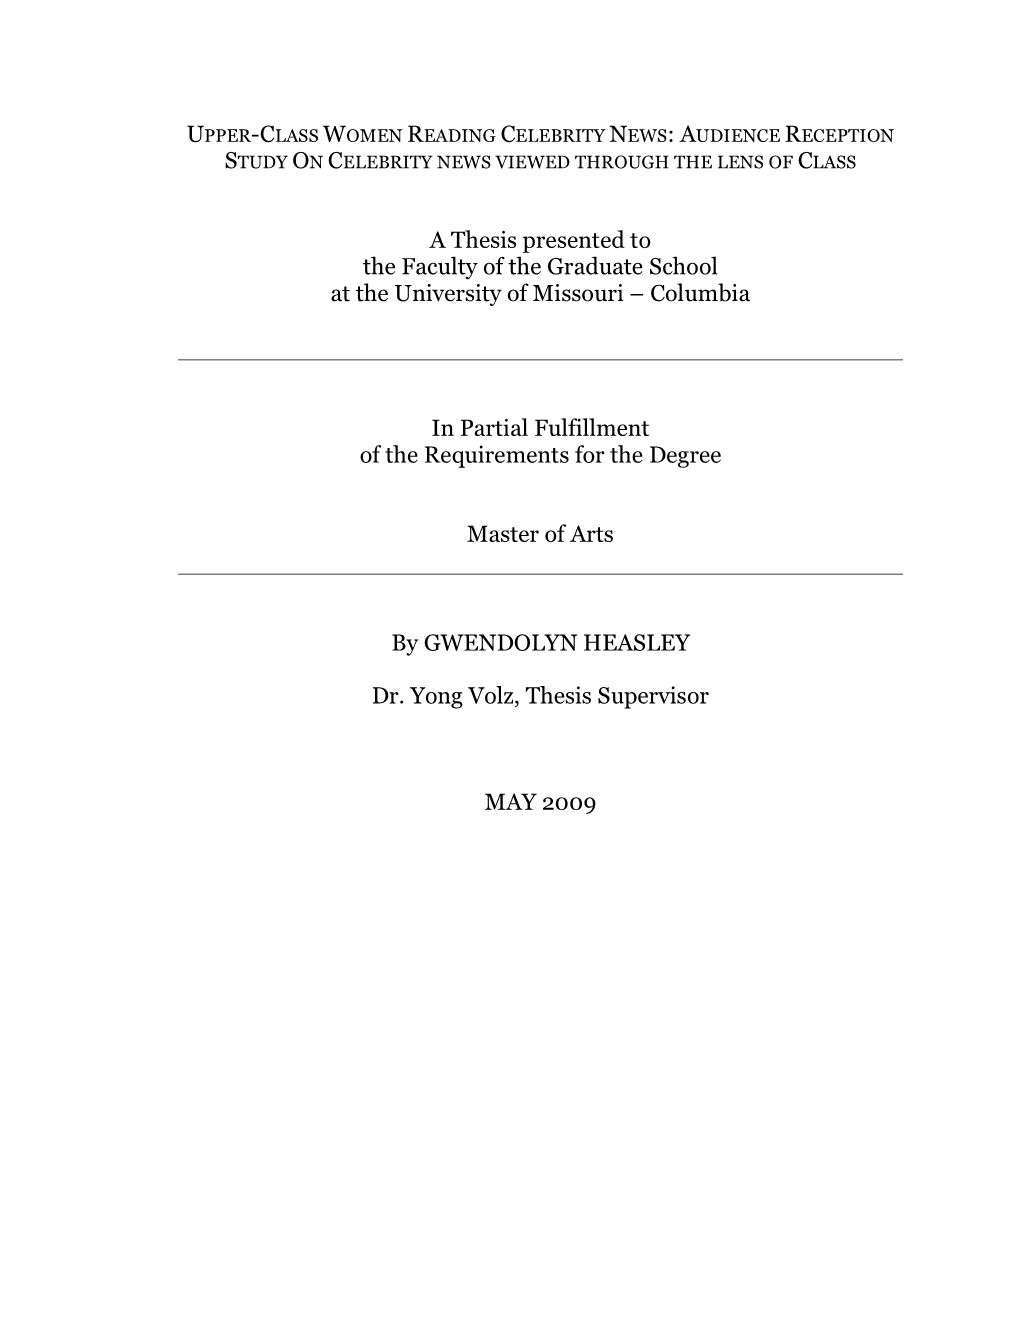 A Thesis Presented to the Faculty of the Graduate School at the University of Missouri – Columbia